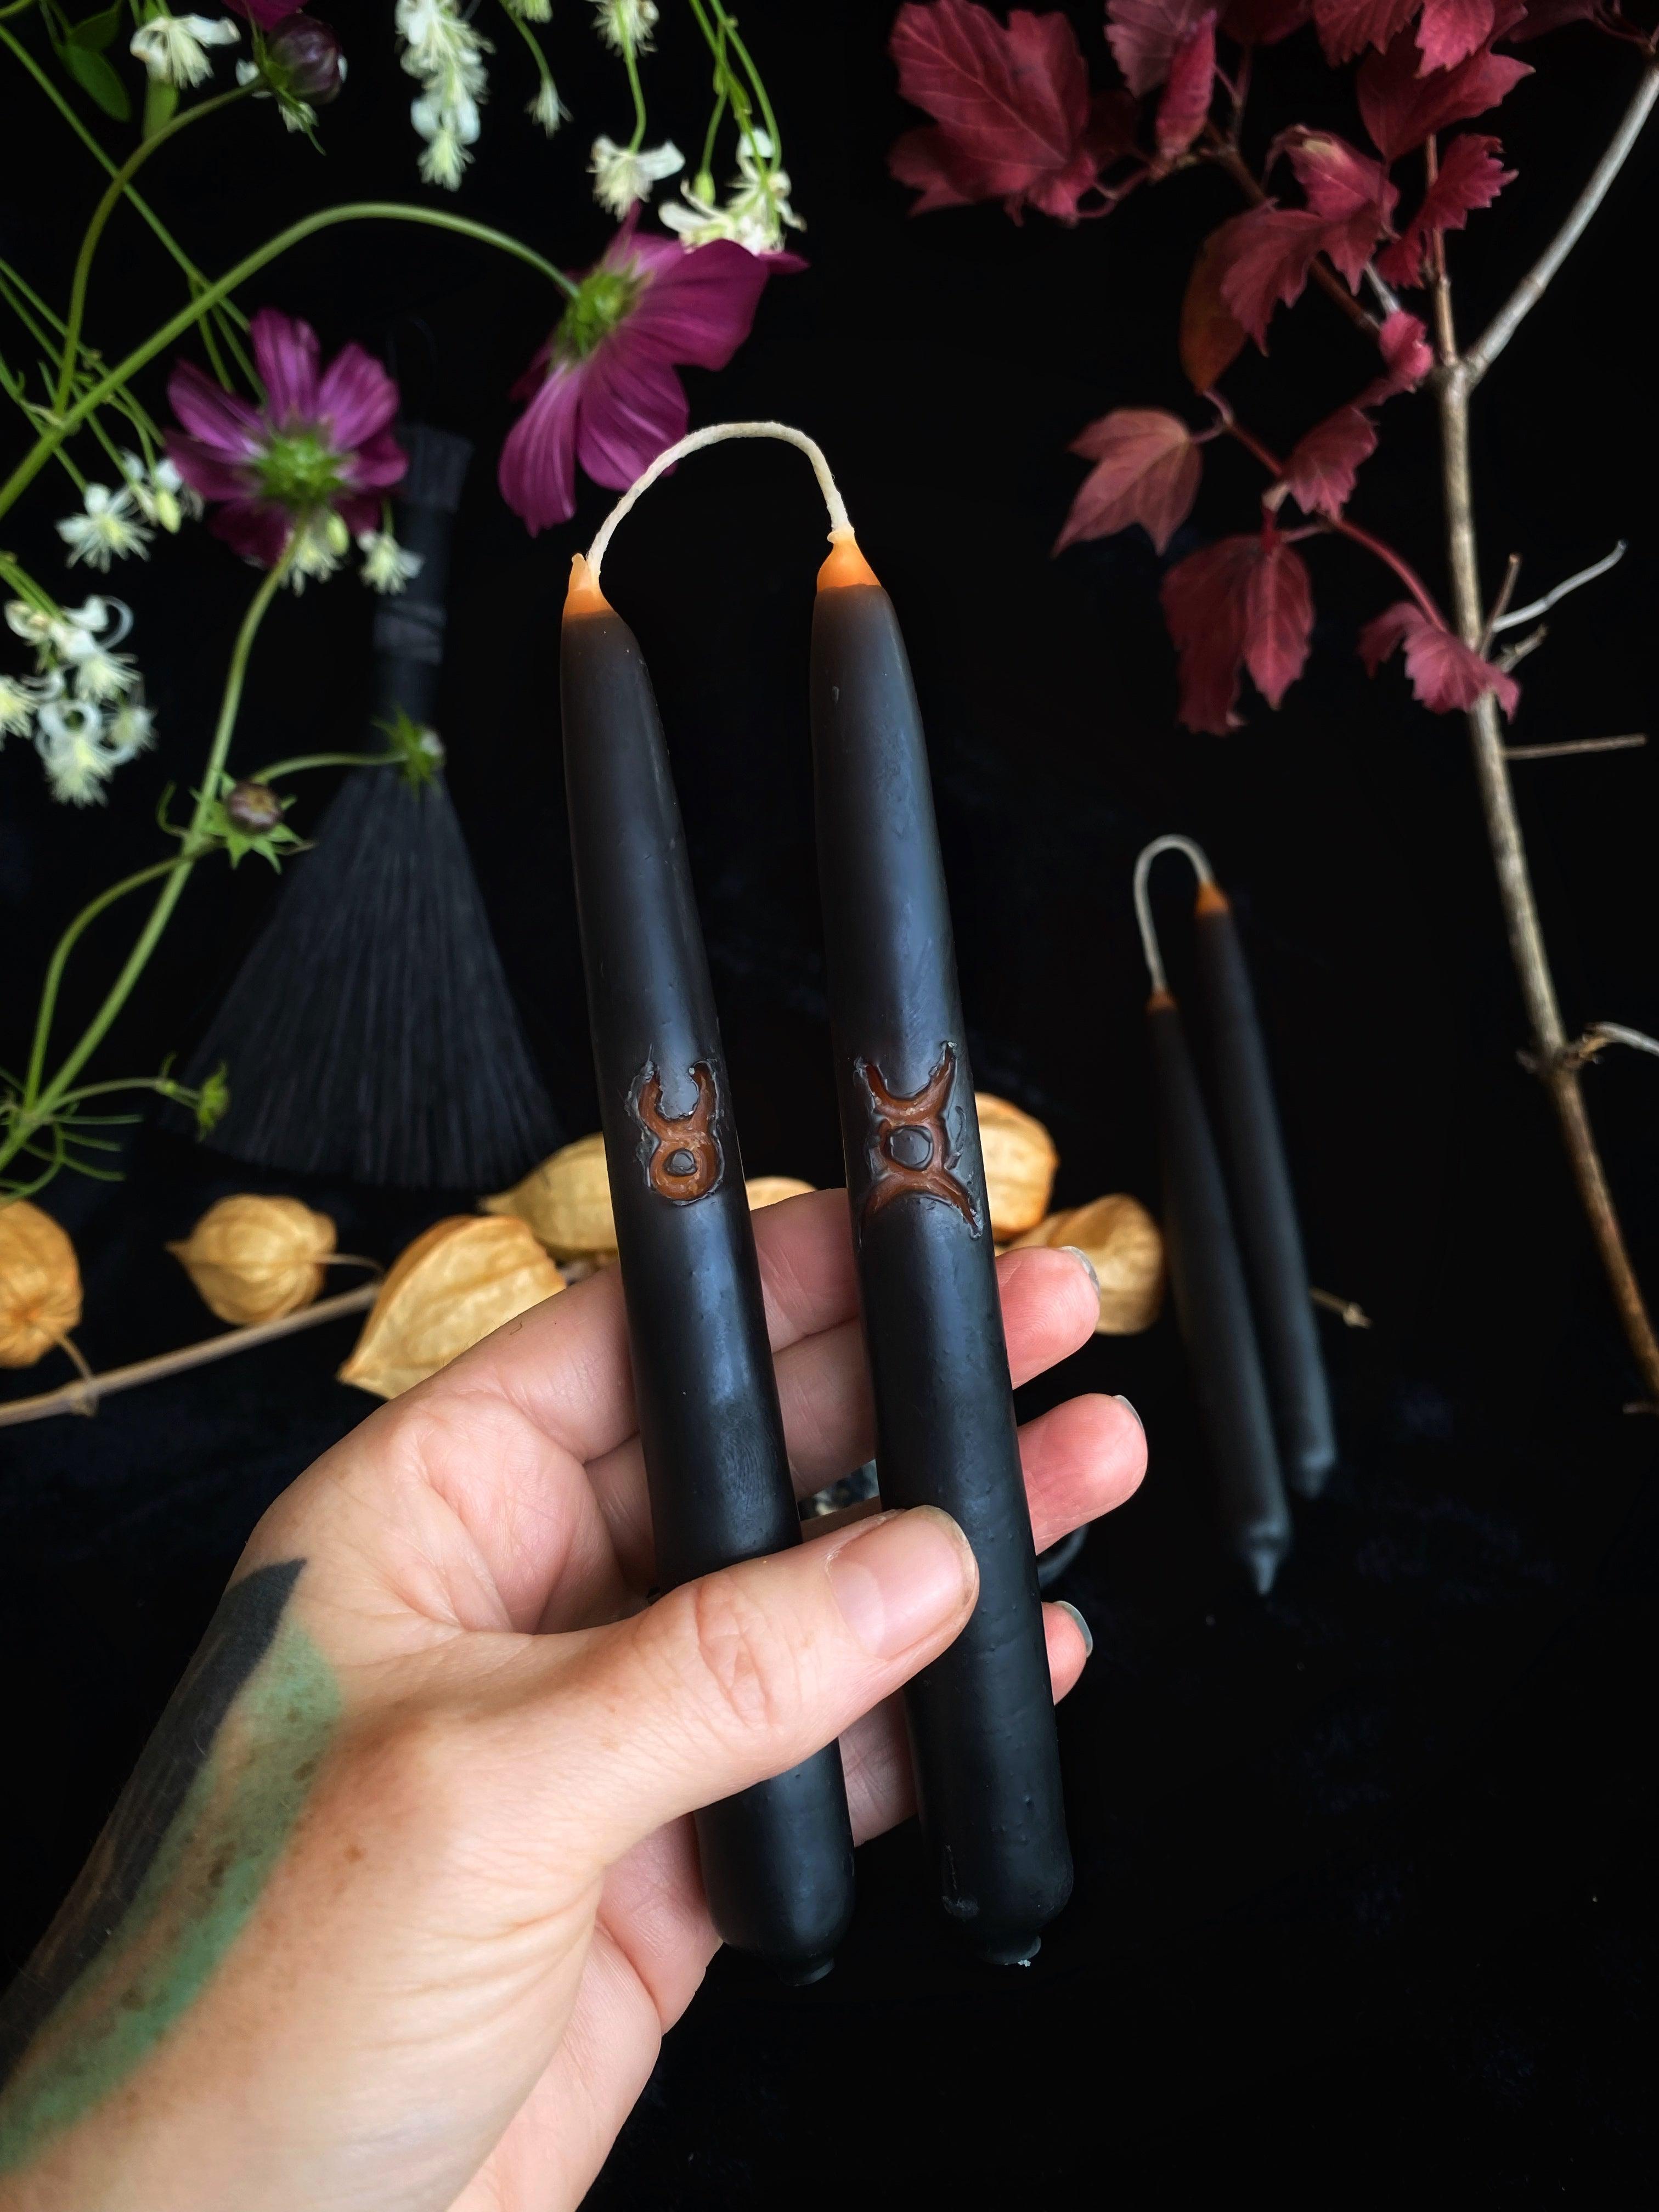 Specialty Witches Wands - Hand Dipped, Taper Beeswax Spell (6" Chime) Candles - Keven Craft Rituals